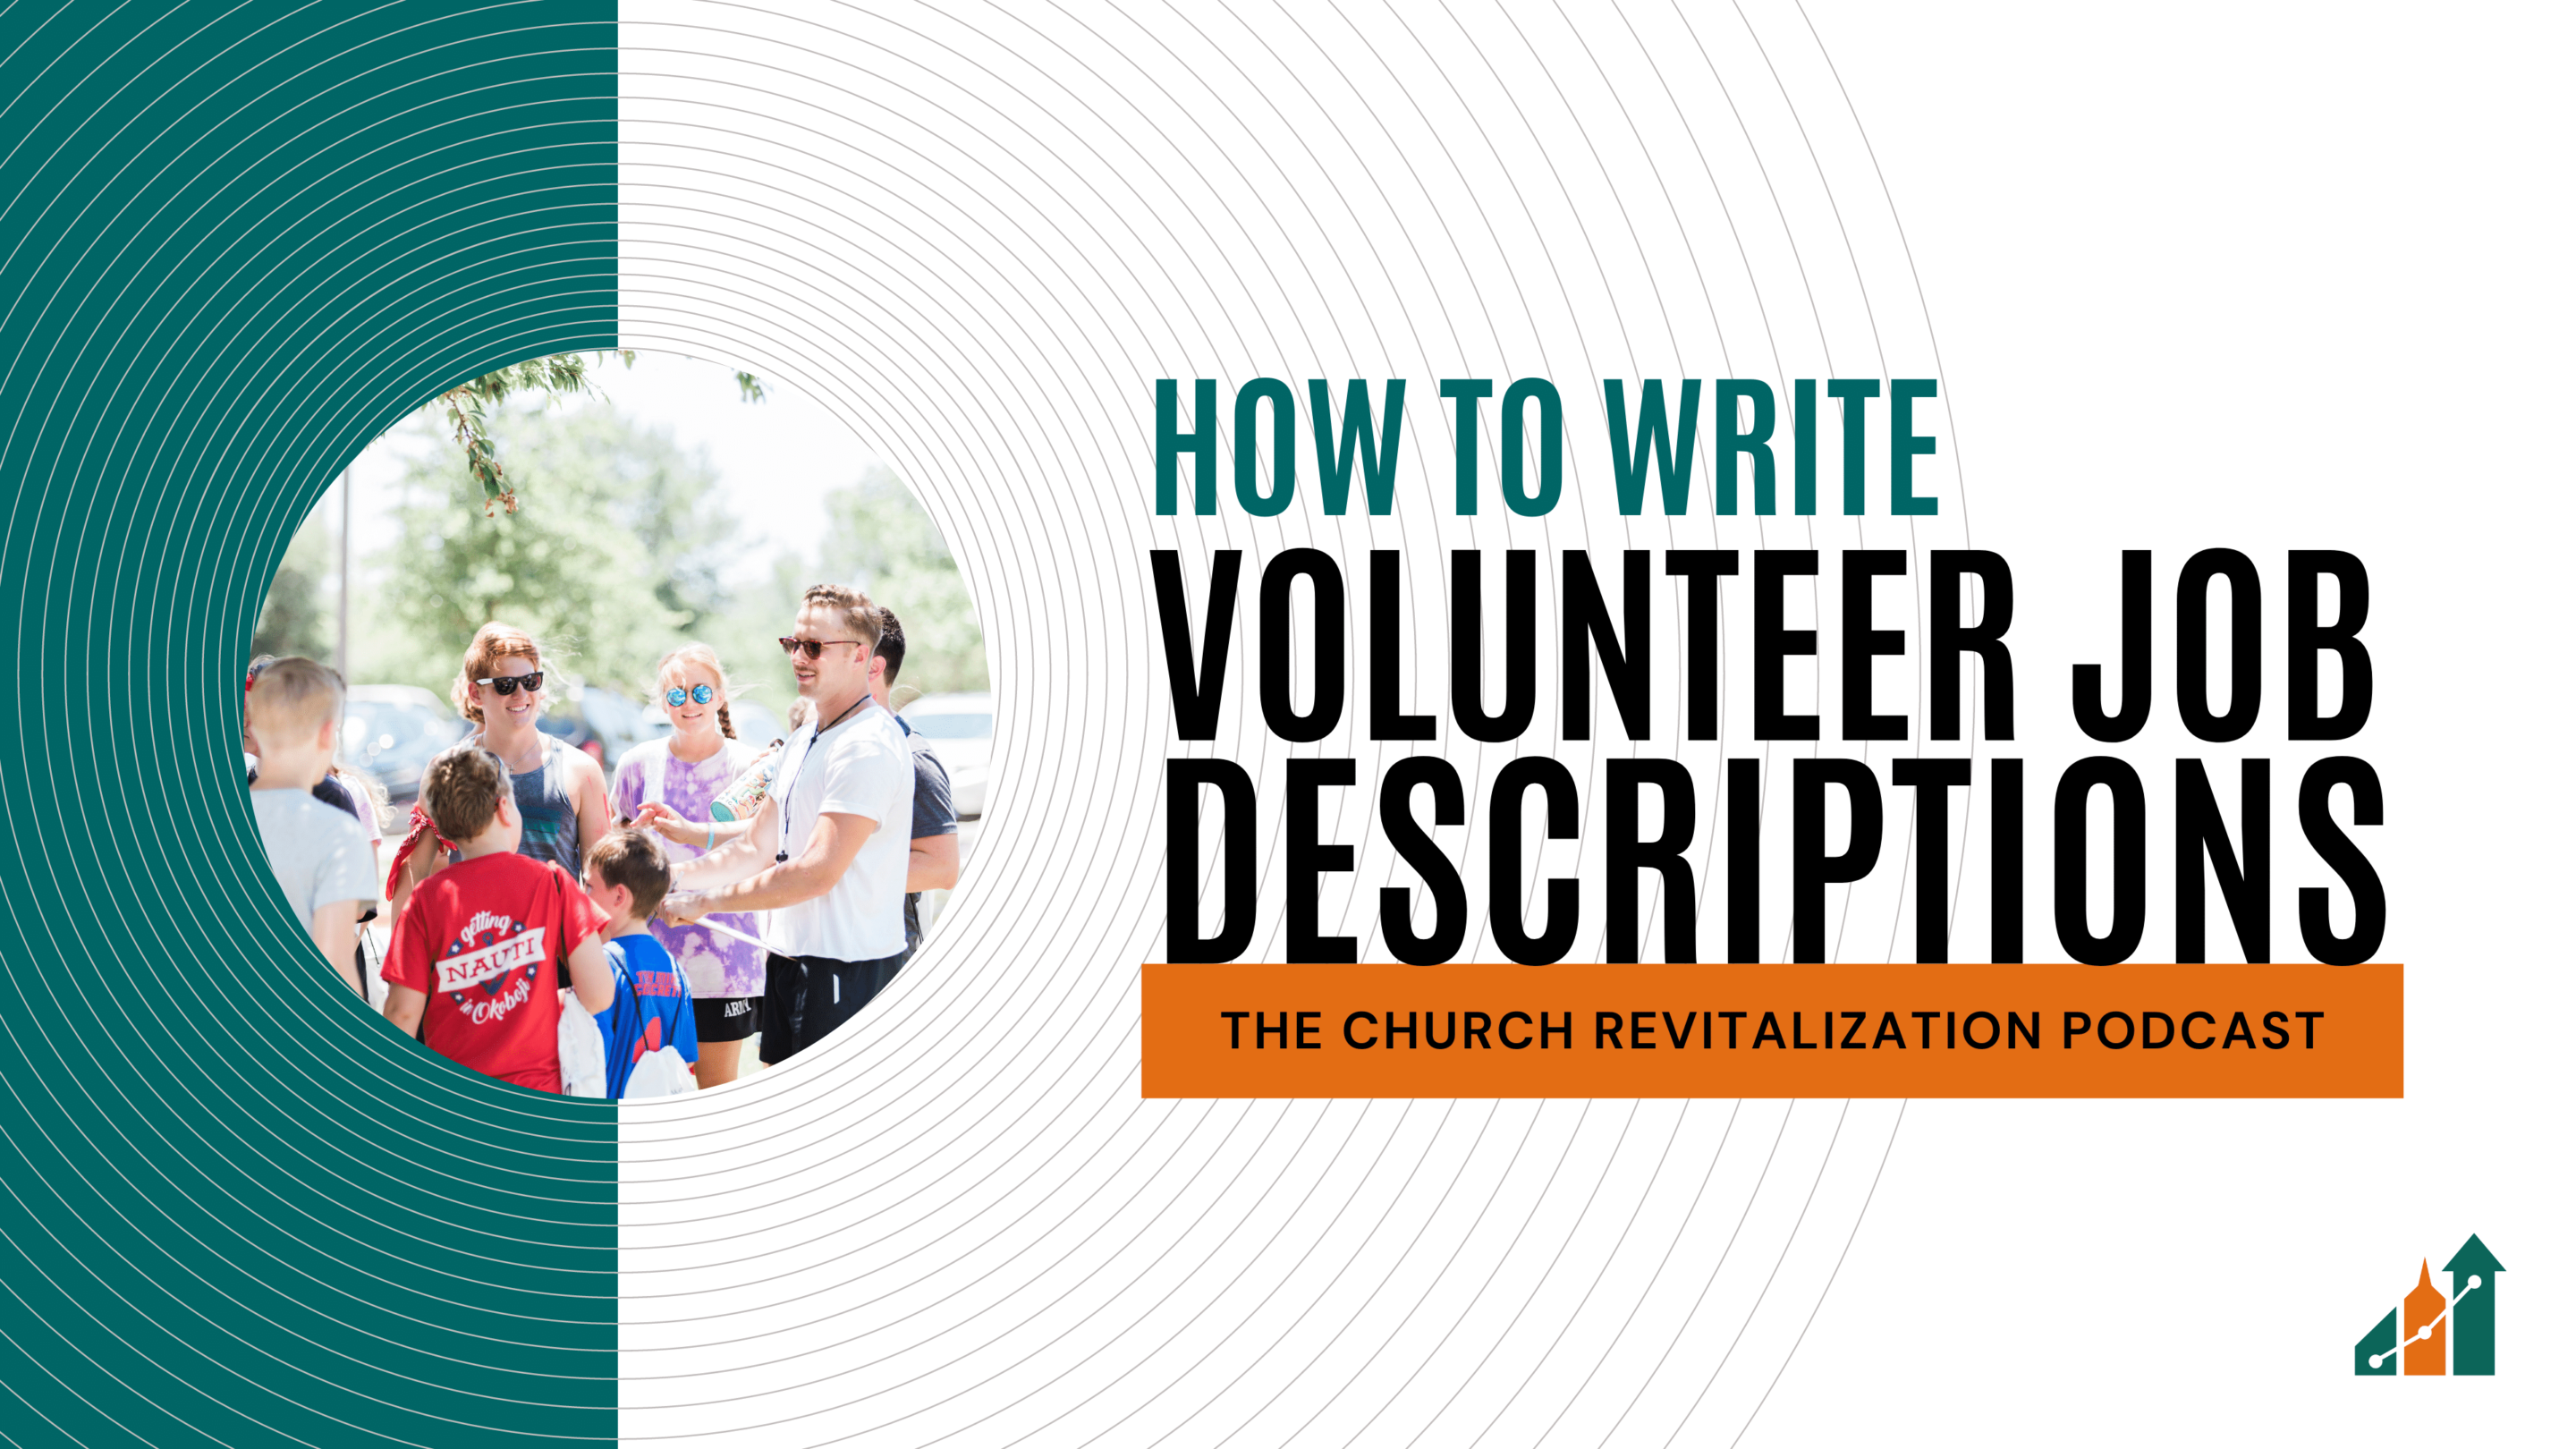 how-to-write-volunteer-job-descriptions_the-church-revitalization-podcast